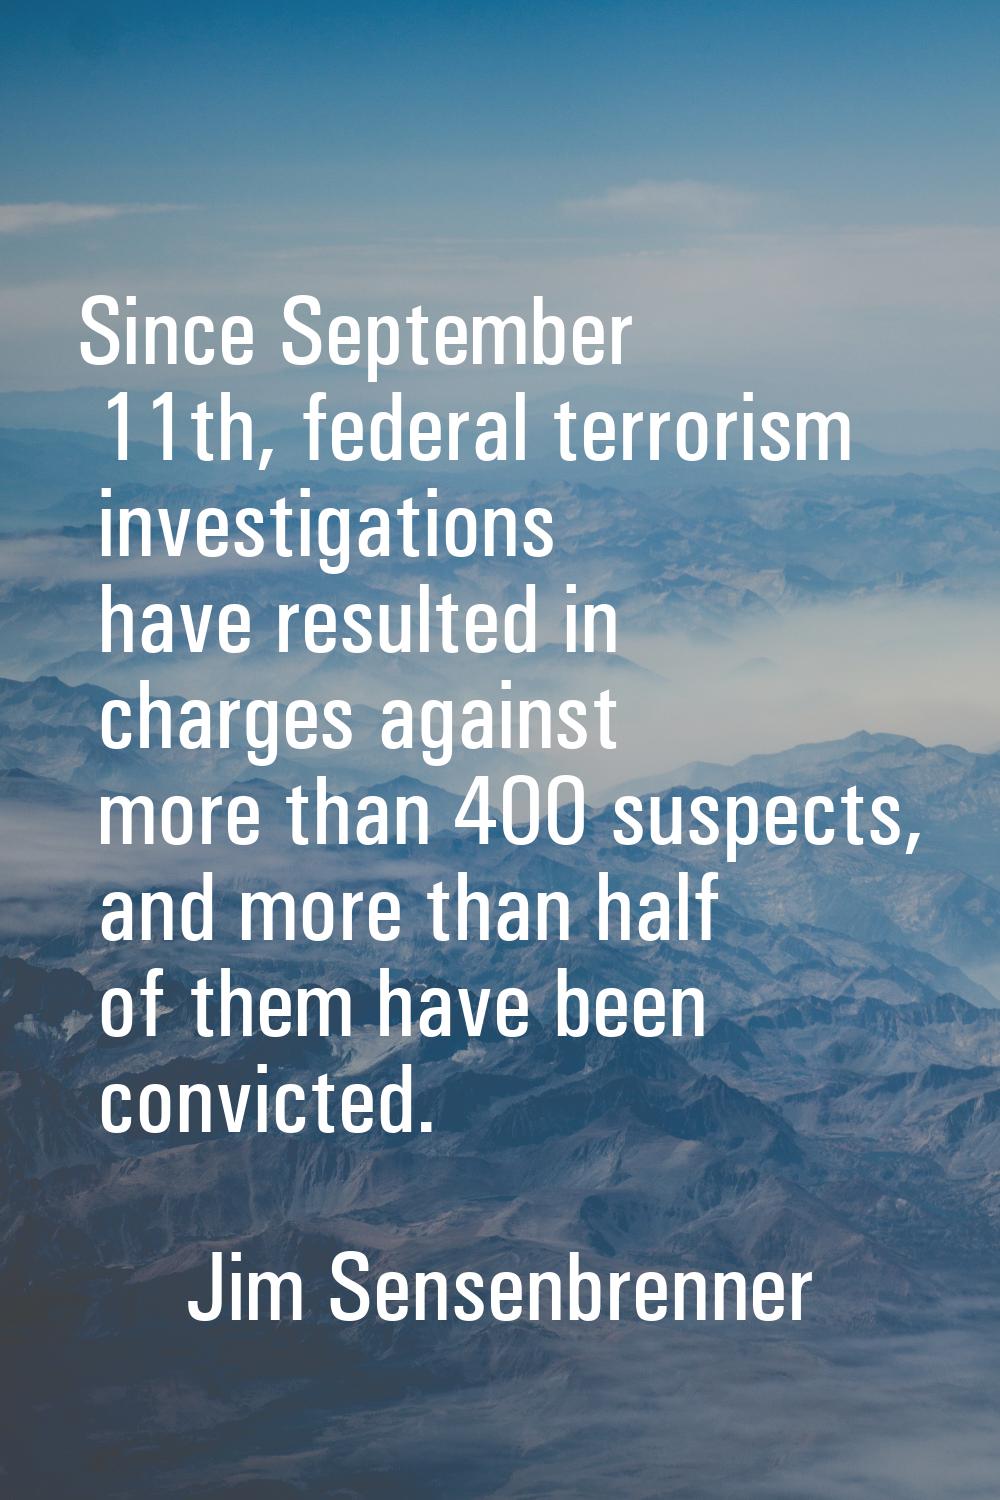 Since September 11th, federal terrorism investigations have resulted in charges against more than 4